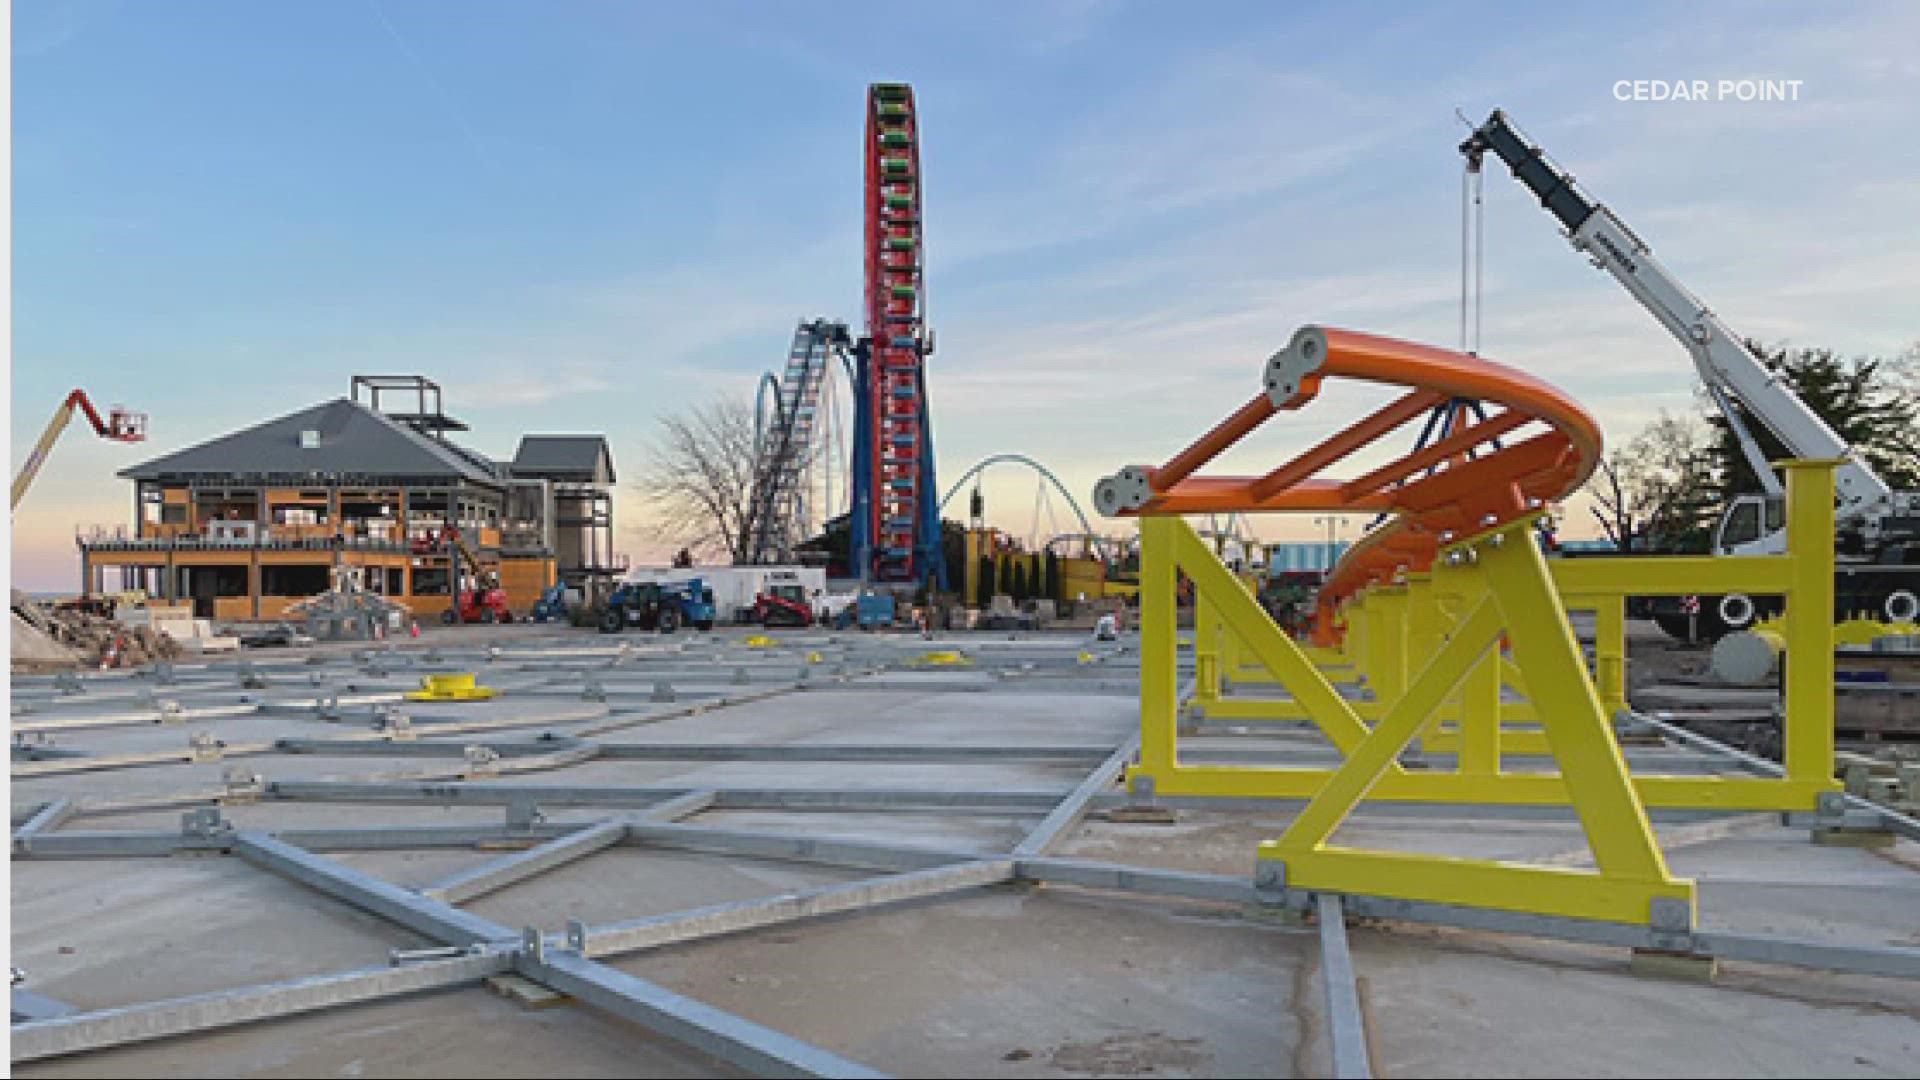 The Wild Mouse roller coaster will feature spinning cars along 1,312 feet of orange track.